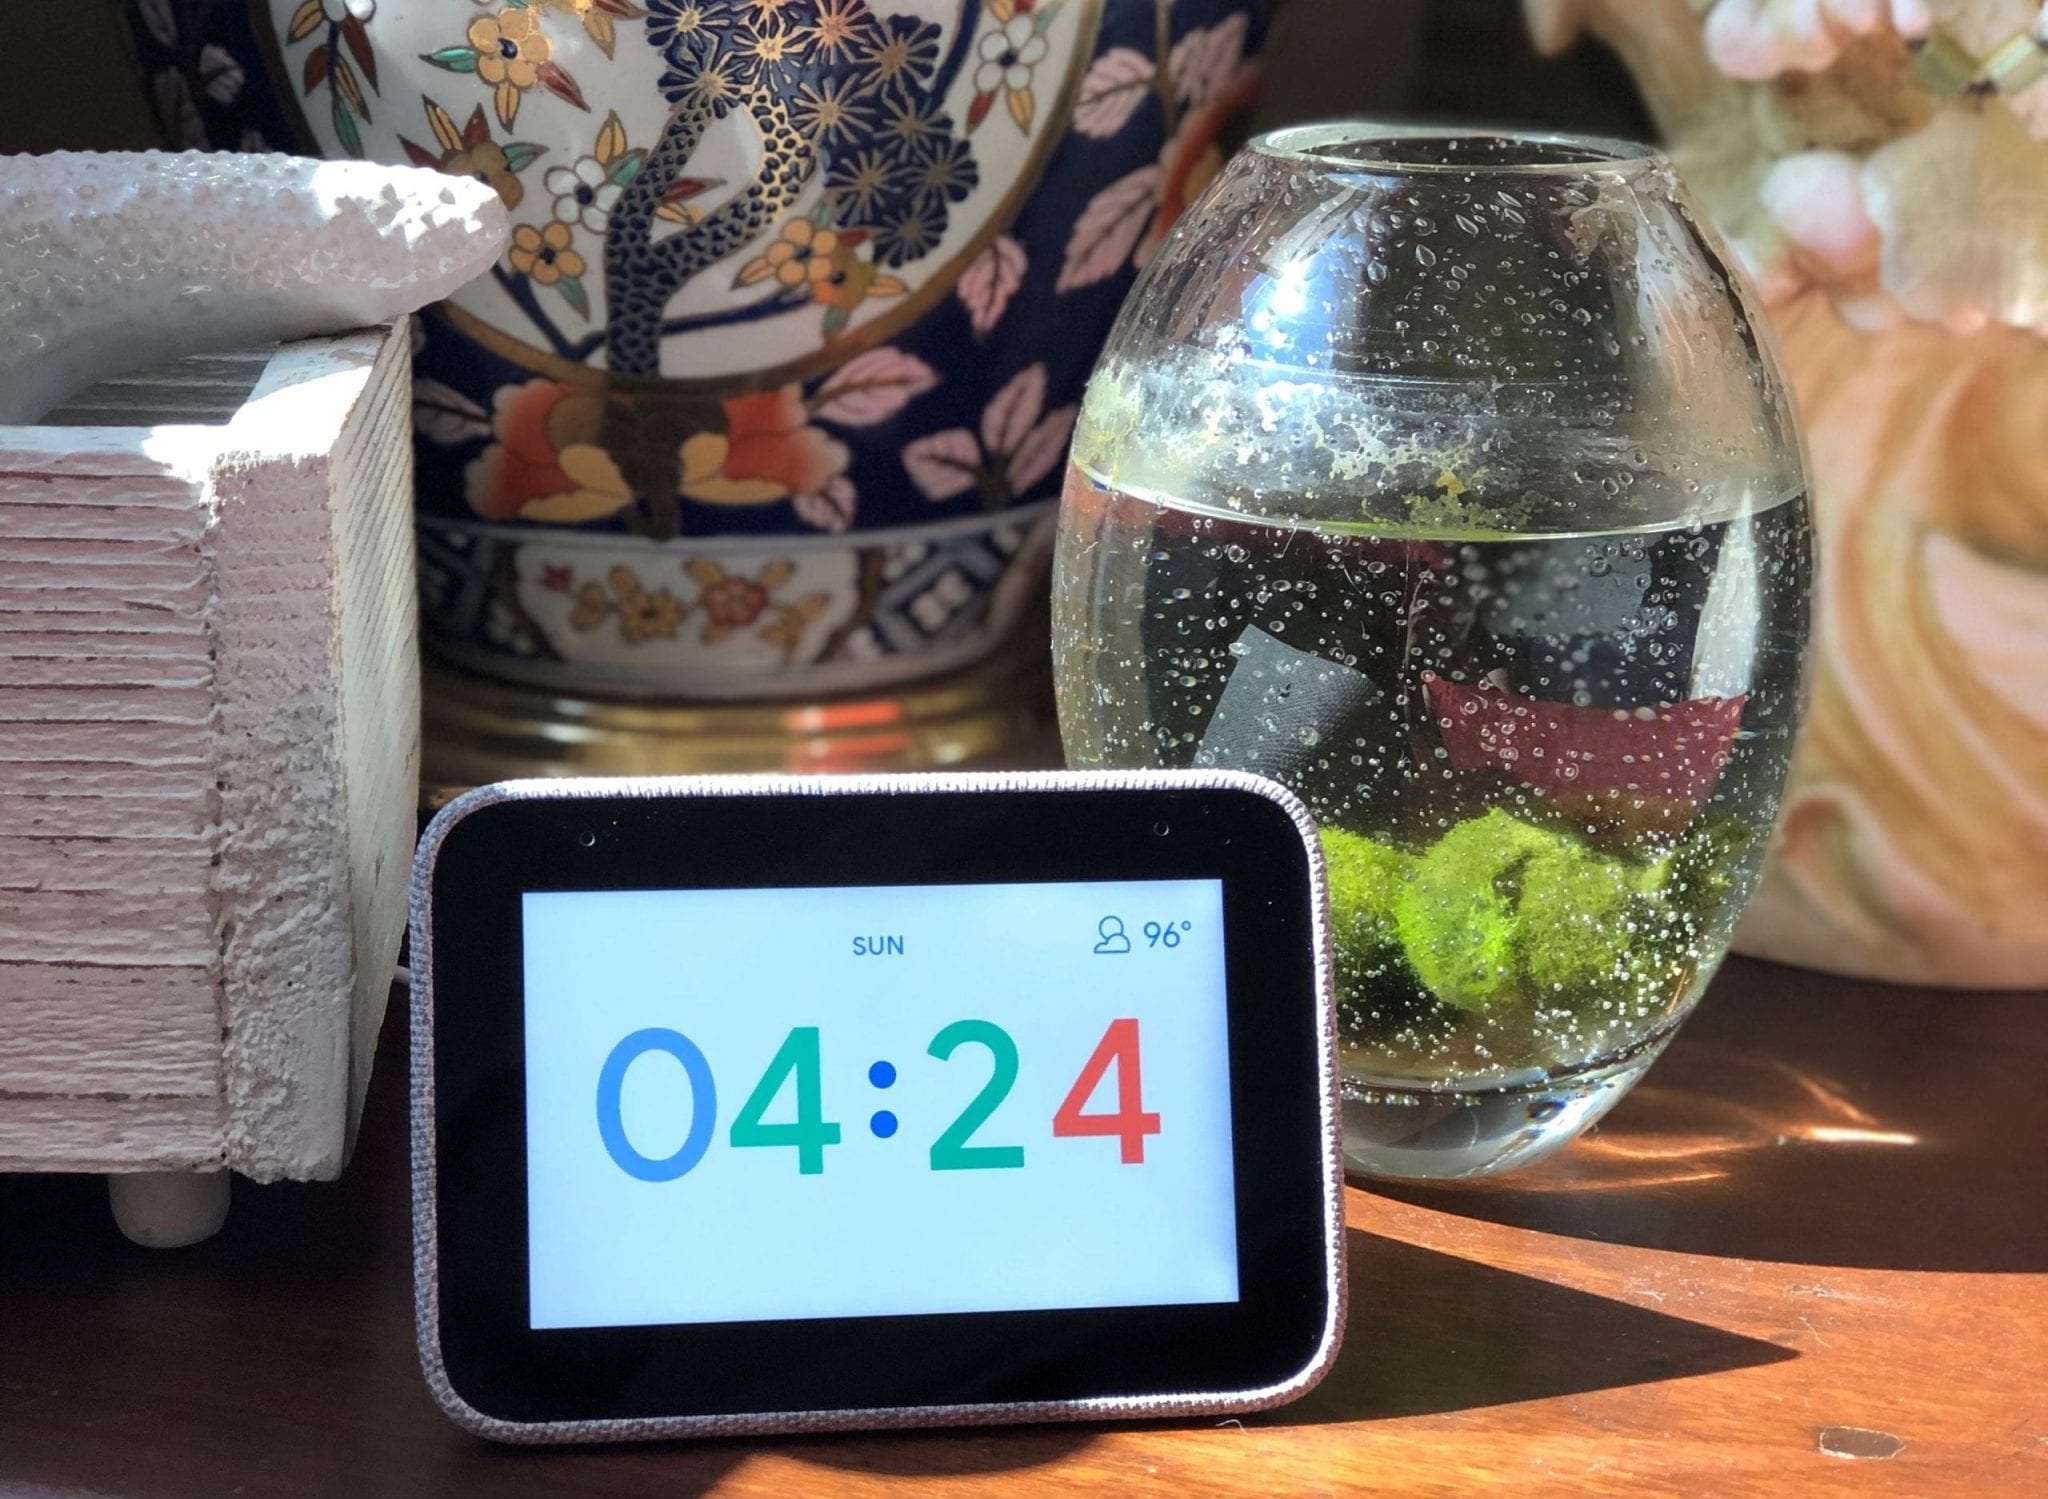 Lenovo Smart Clock spotted in smart home